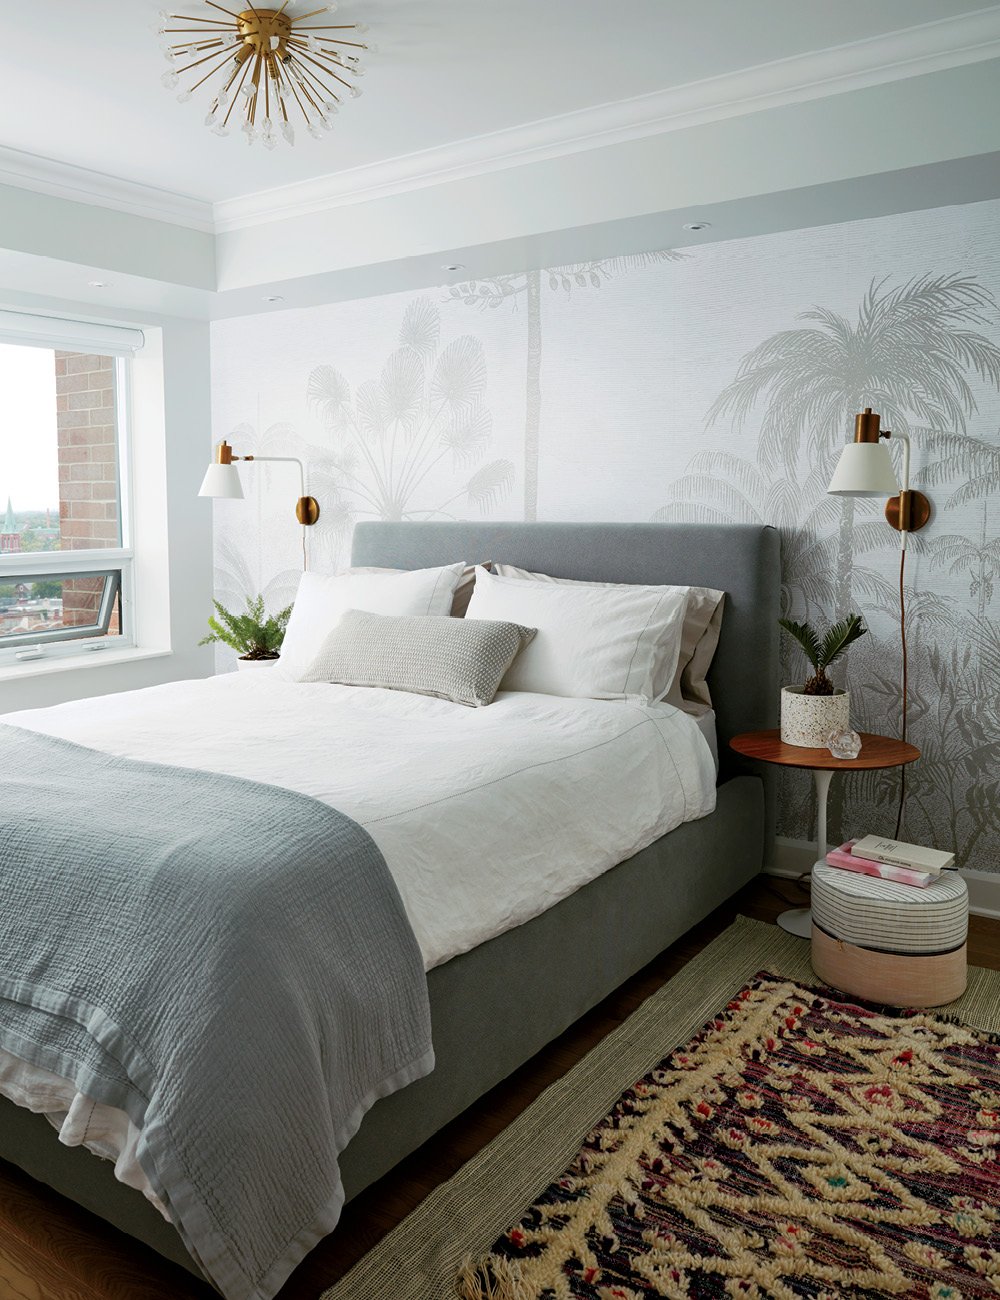 A queen bed with a dove grey fabric headboard against a wall with a grey and white removable mural.